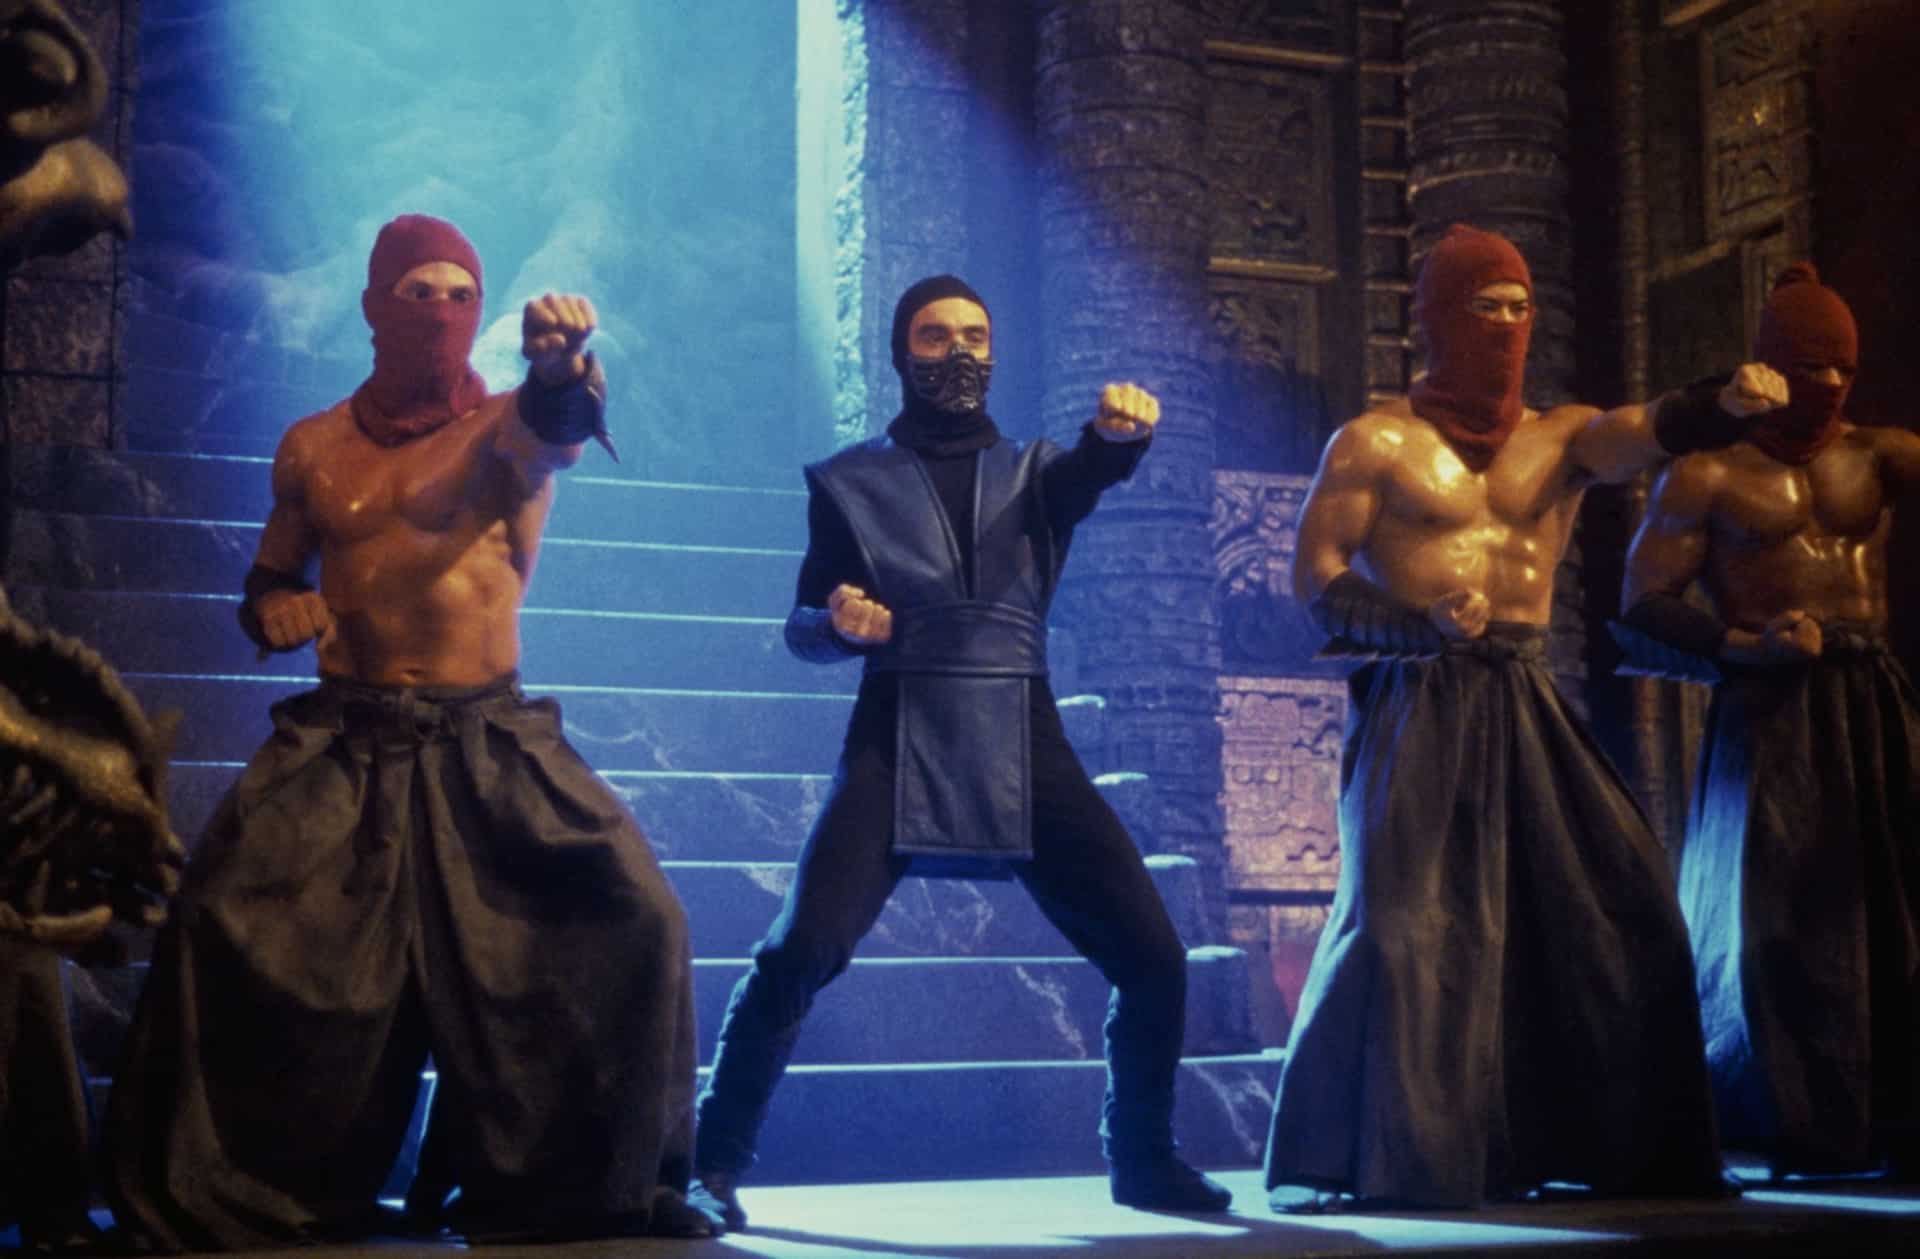 Live action Sub-Zero striking a martial arts pose with three other men.